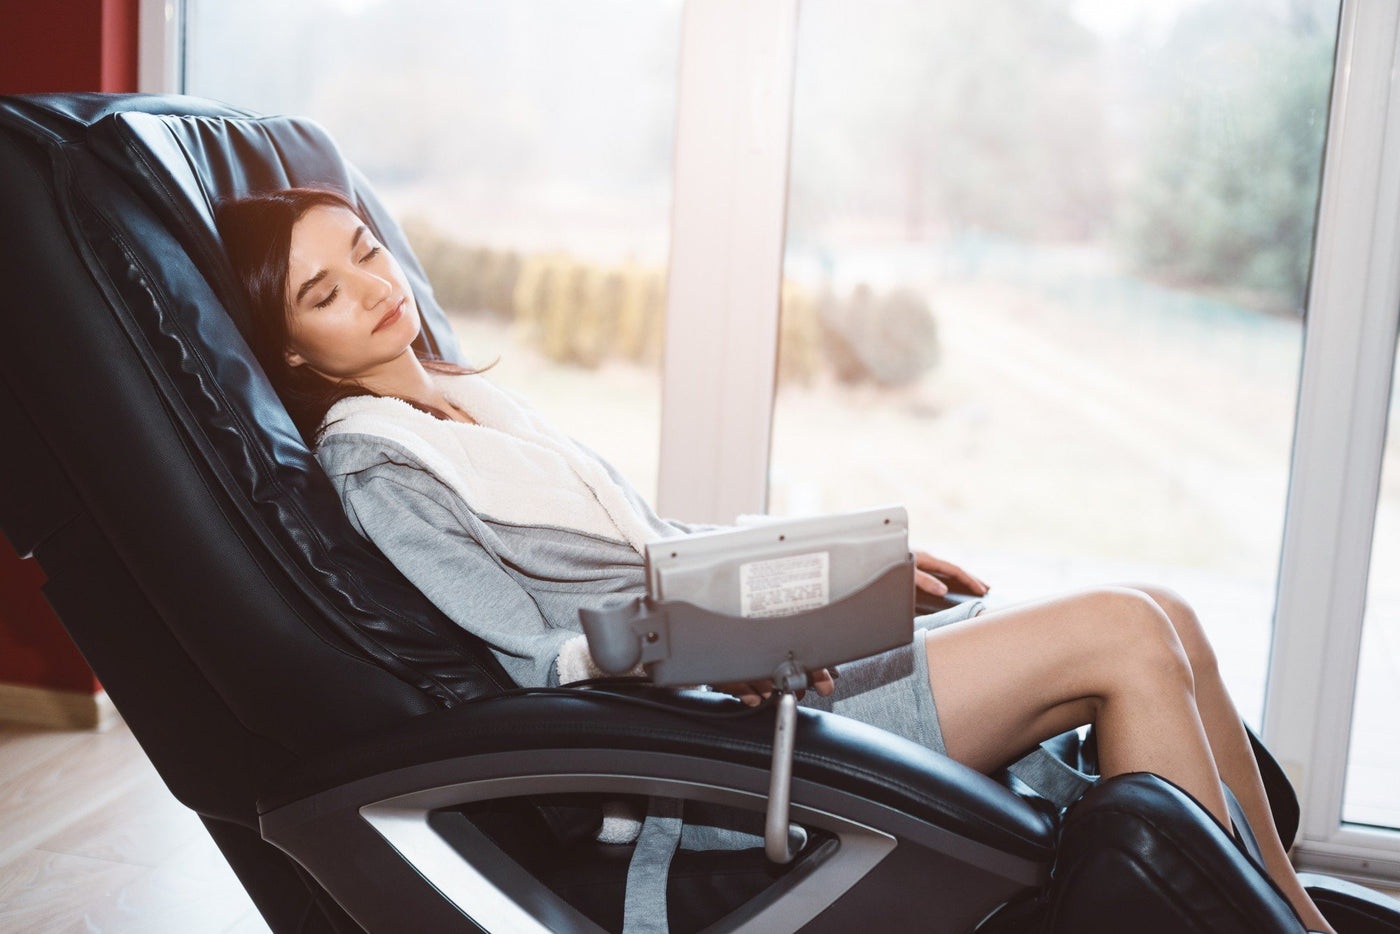 The Top 15 Benefits of Owning a Massage Chair